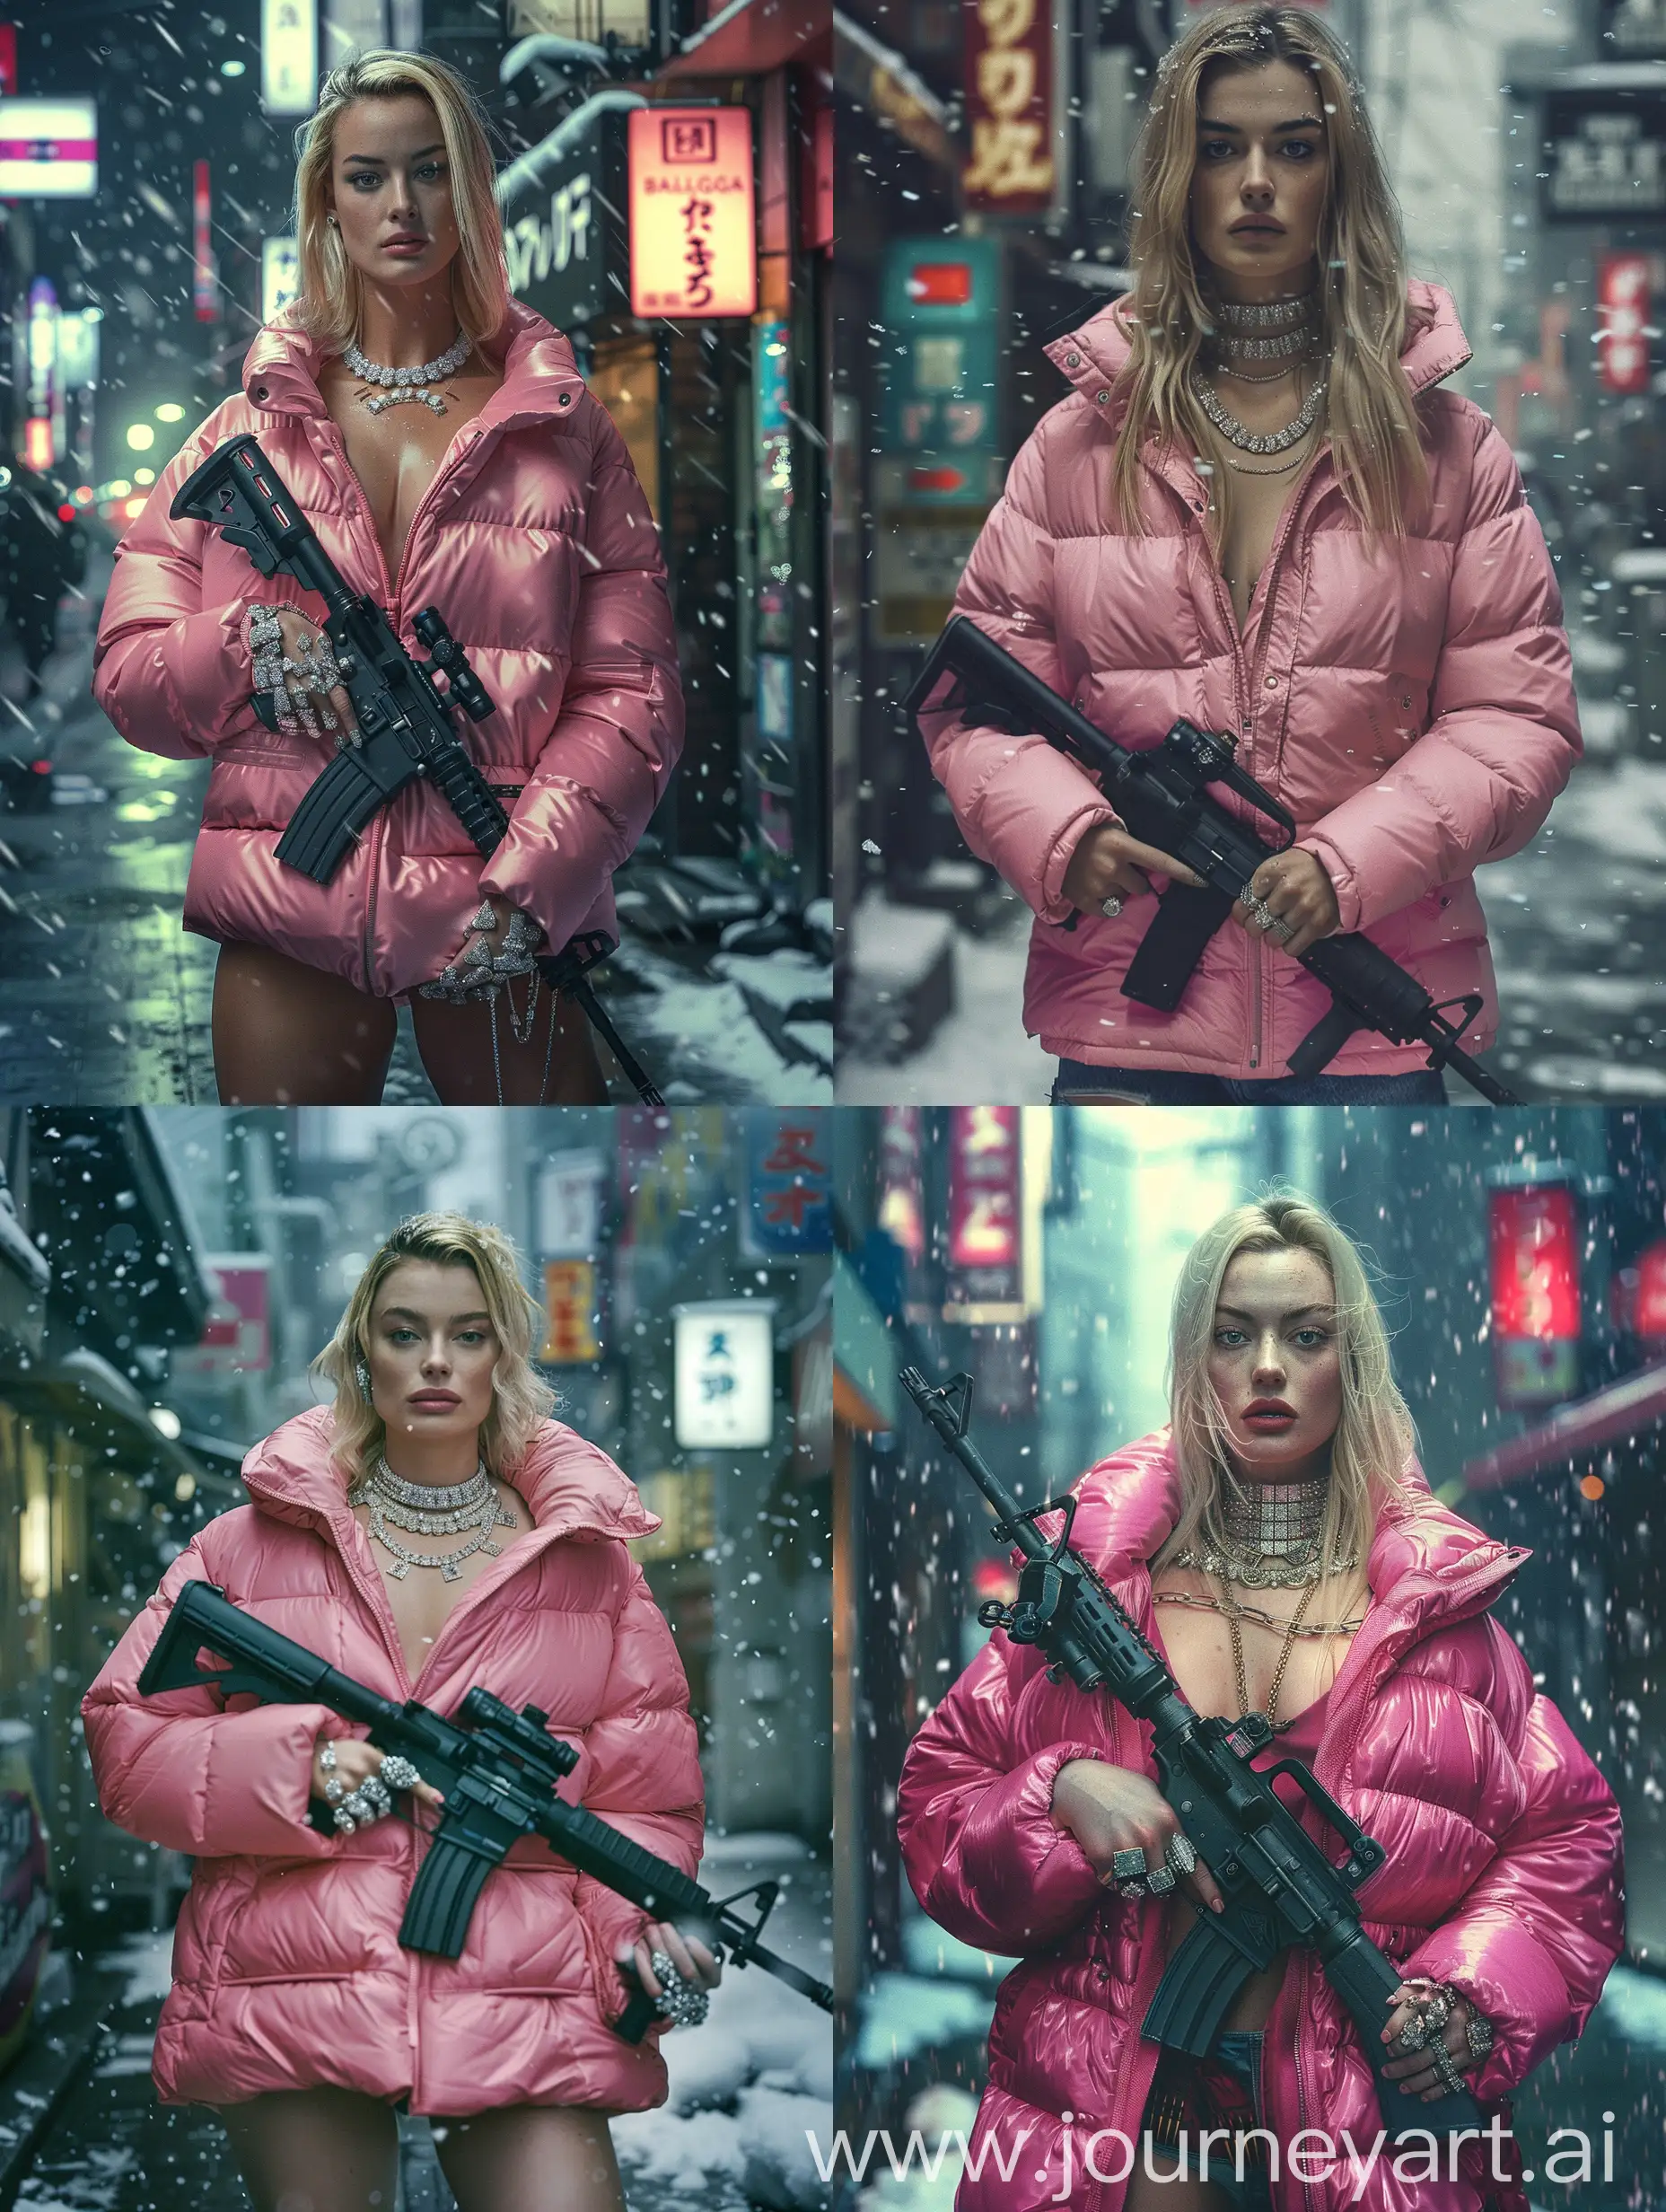 hyperrealistic photo, Margot Robbie wearing a pink balenciaga puffer jacket, wearing diamond jewelry, standing in a tokyo street, holding an AR-15, during a snow flurry, intense, palpaple ethereal ambiance, atmospheric depth, stark contrasts, moody undertones, 8k photorealistic, film grain, cinematic shot with hasselbad --v 6